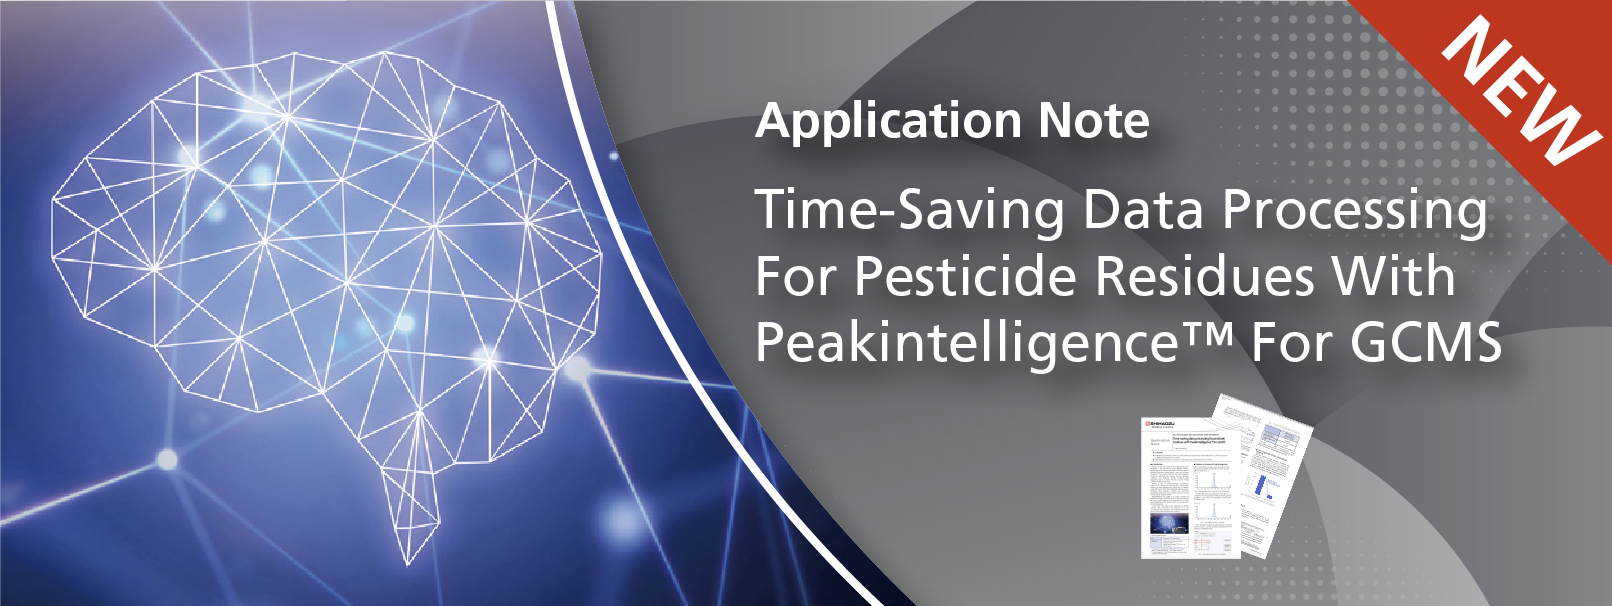 Time-Saving Data Processing for Pesticide Residues with Peakintelligence for GCMS